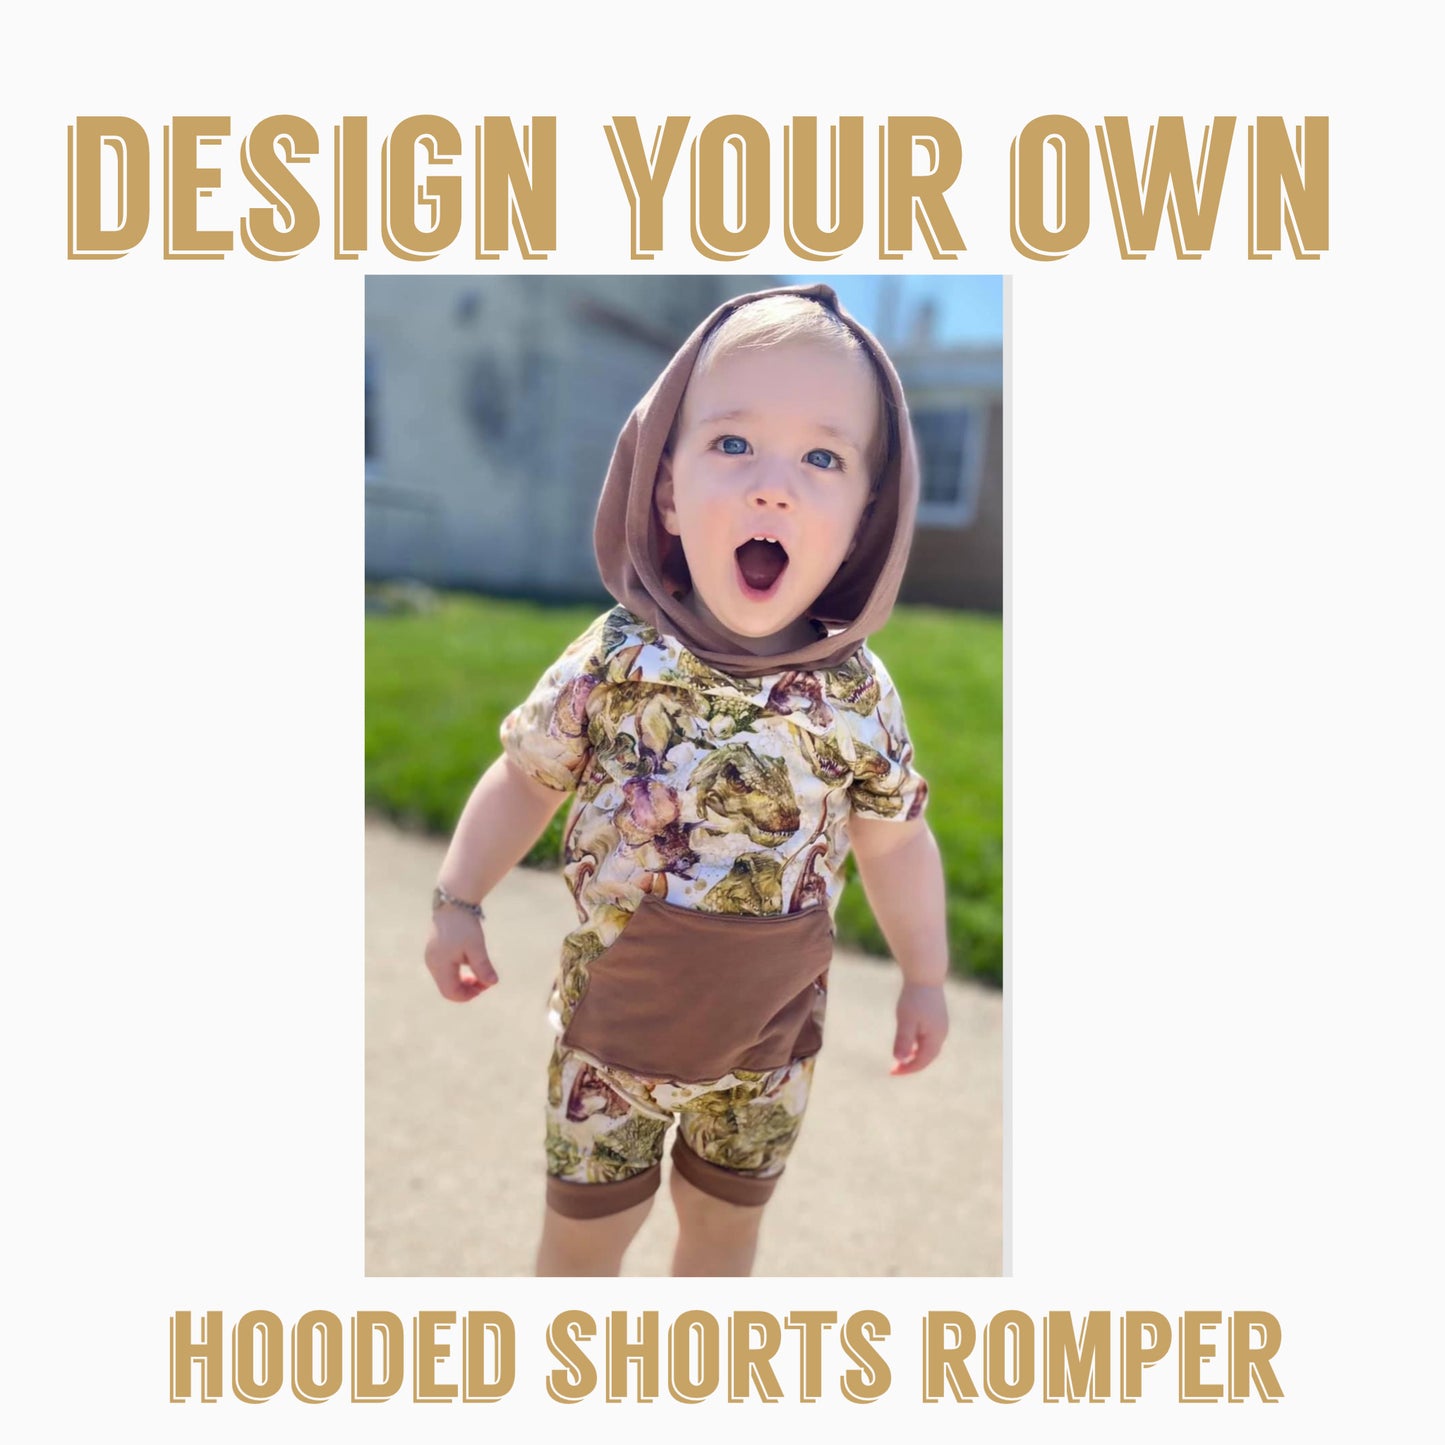 Design your own| Hooded shorts romper